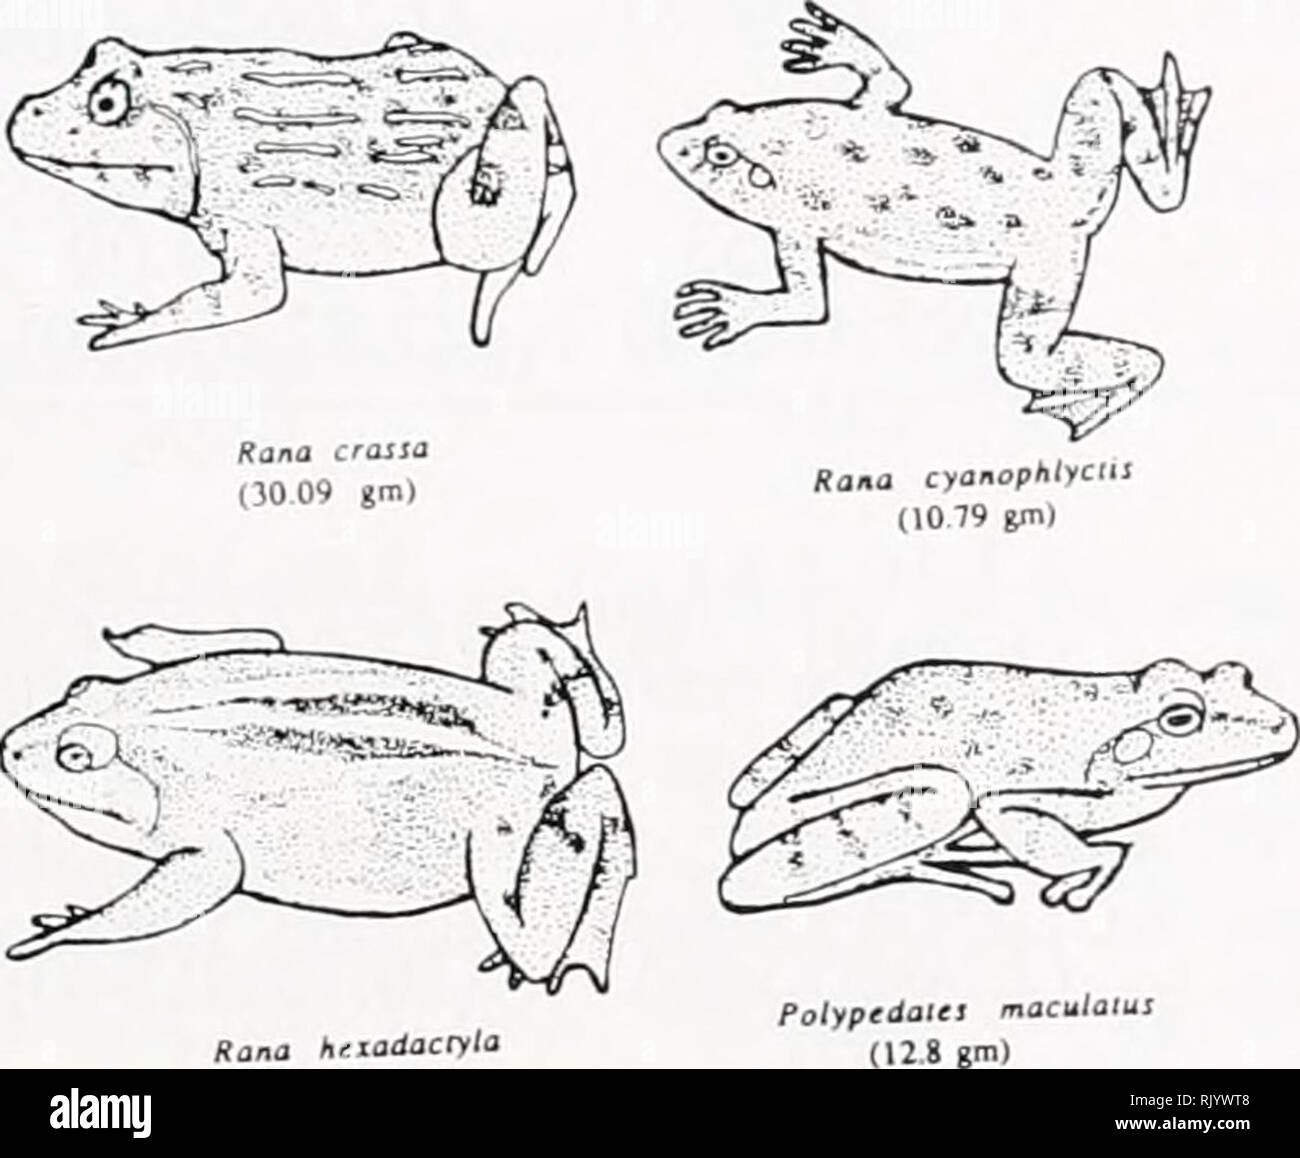 . Asiatic herpetological research. Reptiles -- Asia Periodicals; Amphibians -- Asia Periodicals. Uperodon tystorna (13 0 gm) Microhyla ornaia (0 362 gm). Rana htiadacryla (99 64 gm) FIG. 1. Shapes and masses of the species studied. Figures in brackets are mean weights. Microhyla ornaia (4.1 mm), M. rubra (7.2 mm), Tomopterna rolandae (10.9 mm), Uperodon systoma (12.4 mm), Polypedates maculatus (20.9 mm), /?a/za cyanophlyctis (16.1 mm), fl. crassa (22.9 mm) and R. hexadactyla (33.4 mm). Abbreviations used include SVL (snout- vent length), HW (head width at the angle of the jaws, perhaps better  Stock Photo